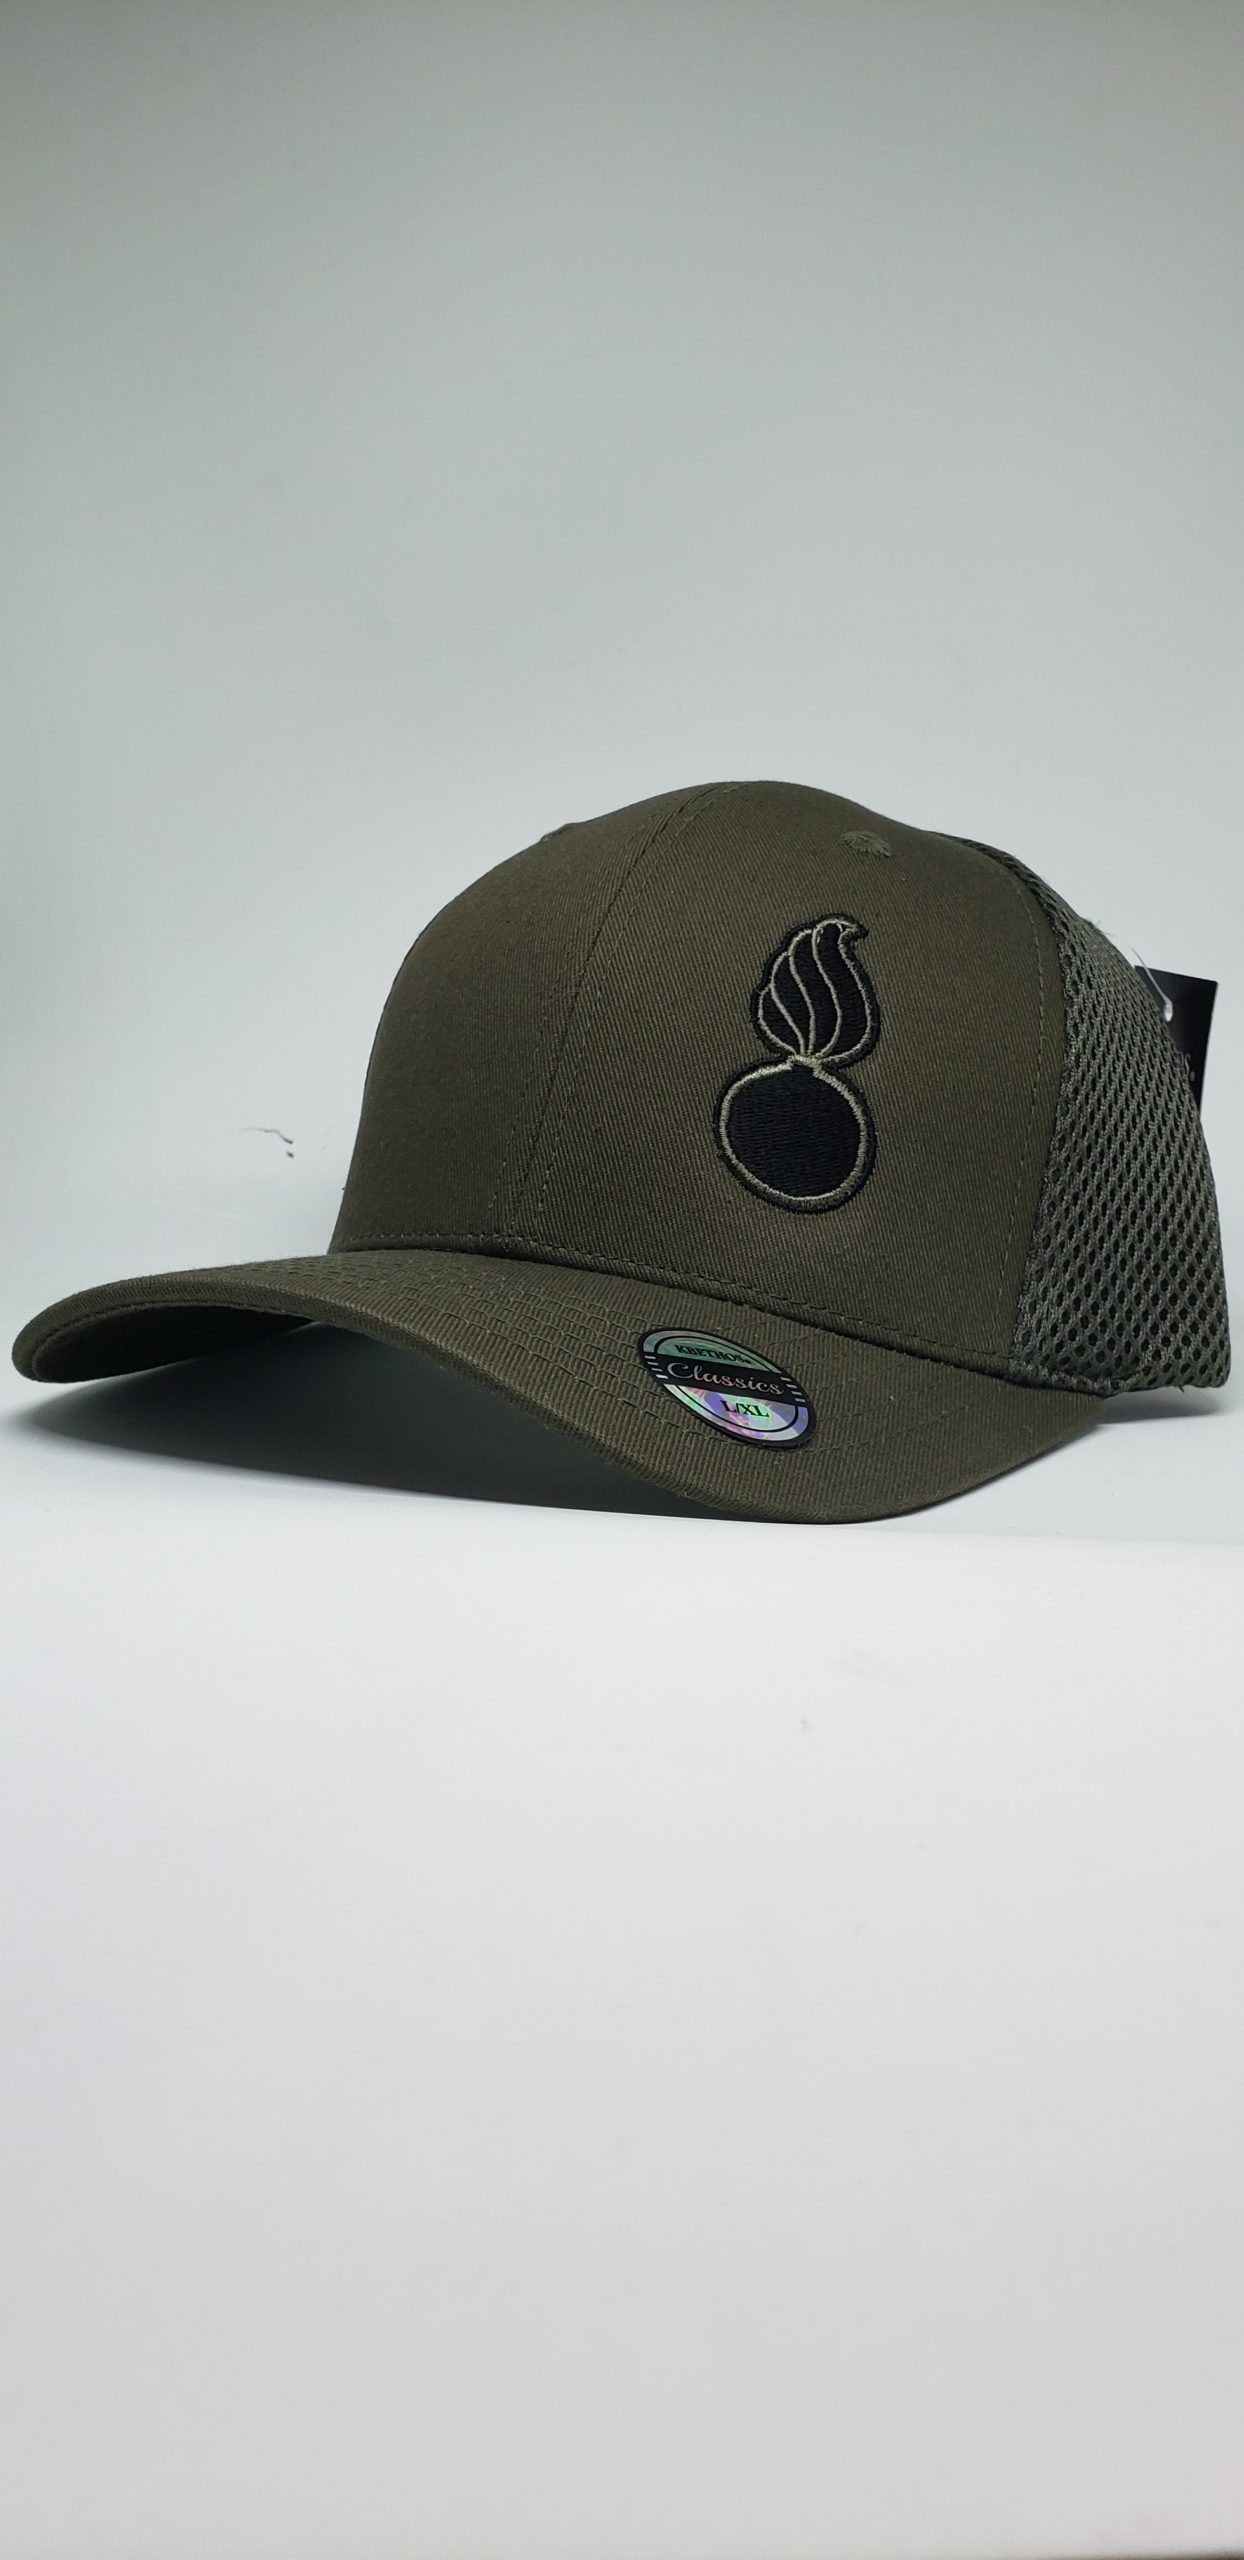 AMMO Pisspot Embroidered Mesh Snapback Trucker Style Hat or Cap